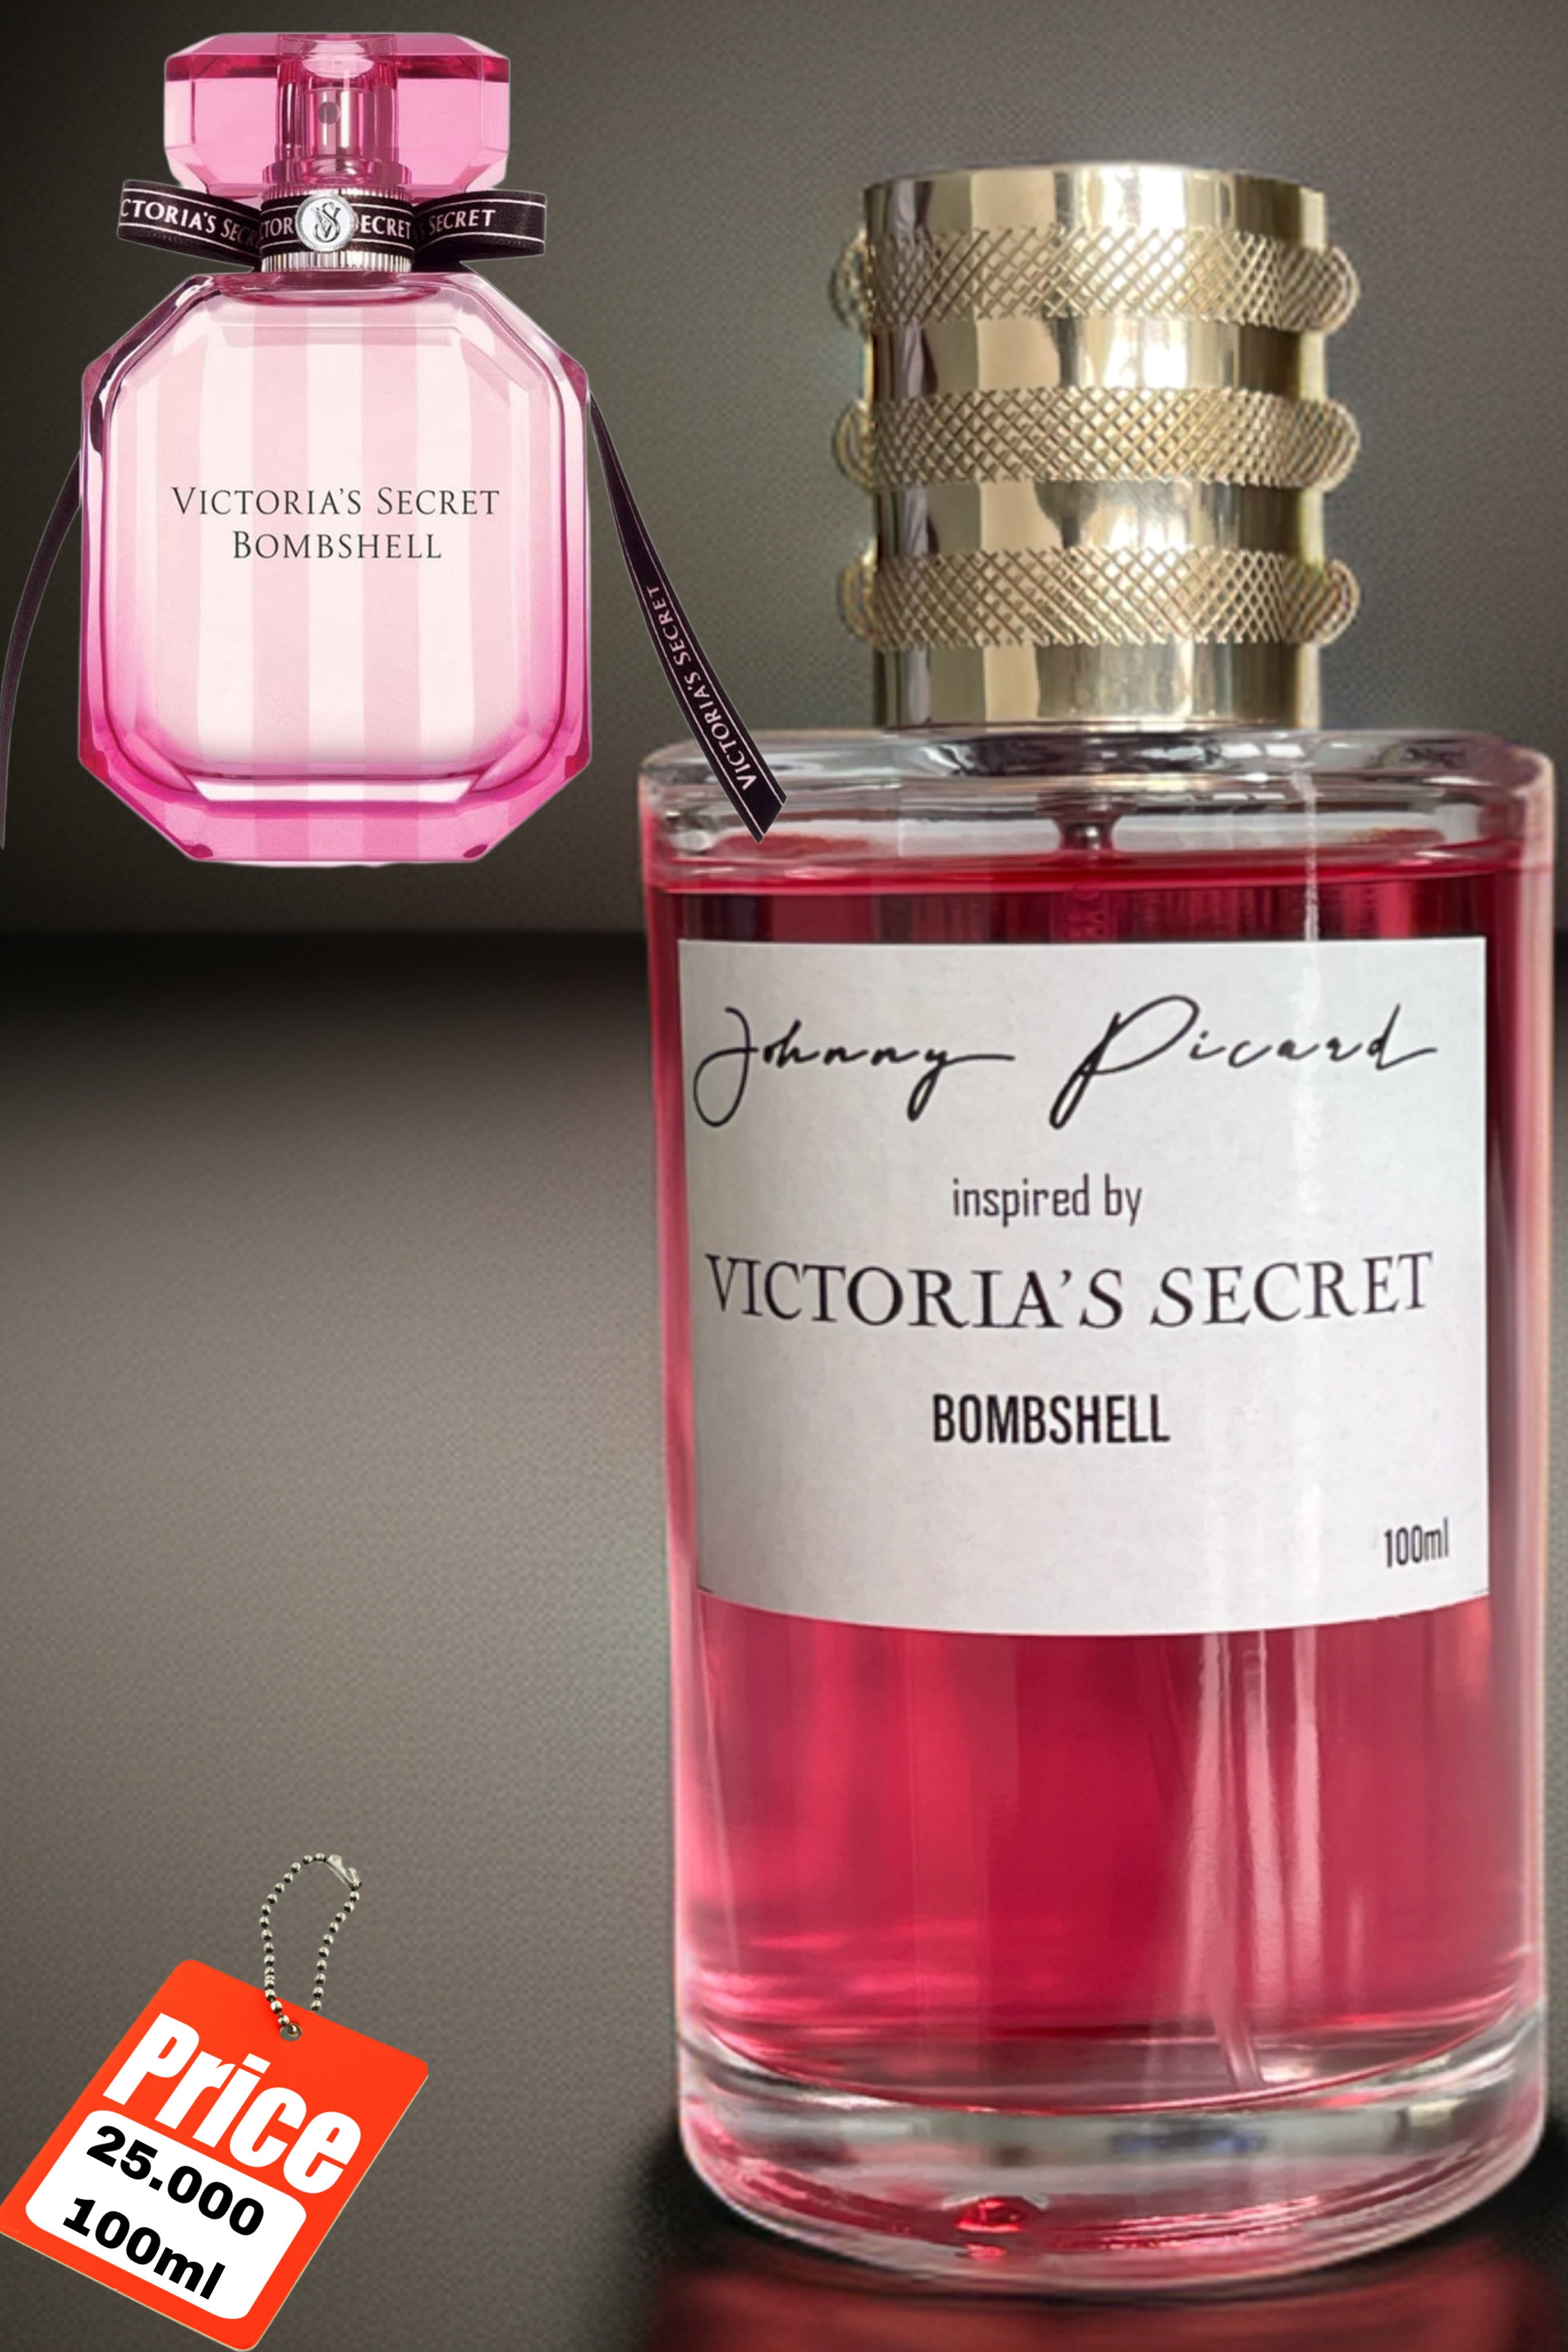 johnny picard inspired by victoria secret  BOMBSELL